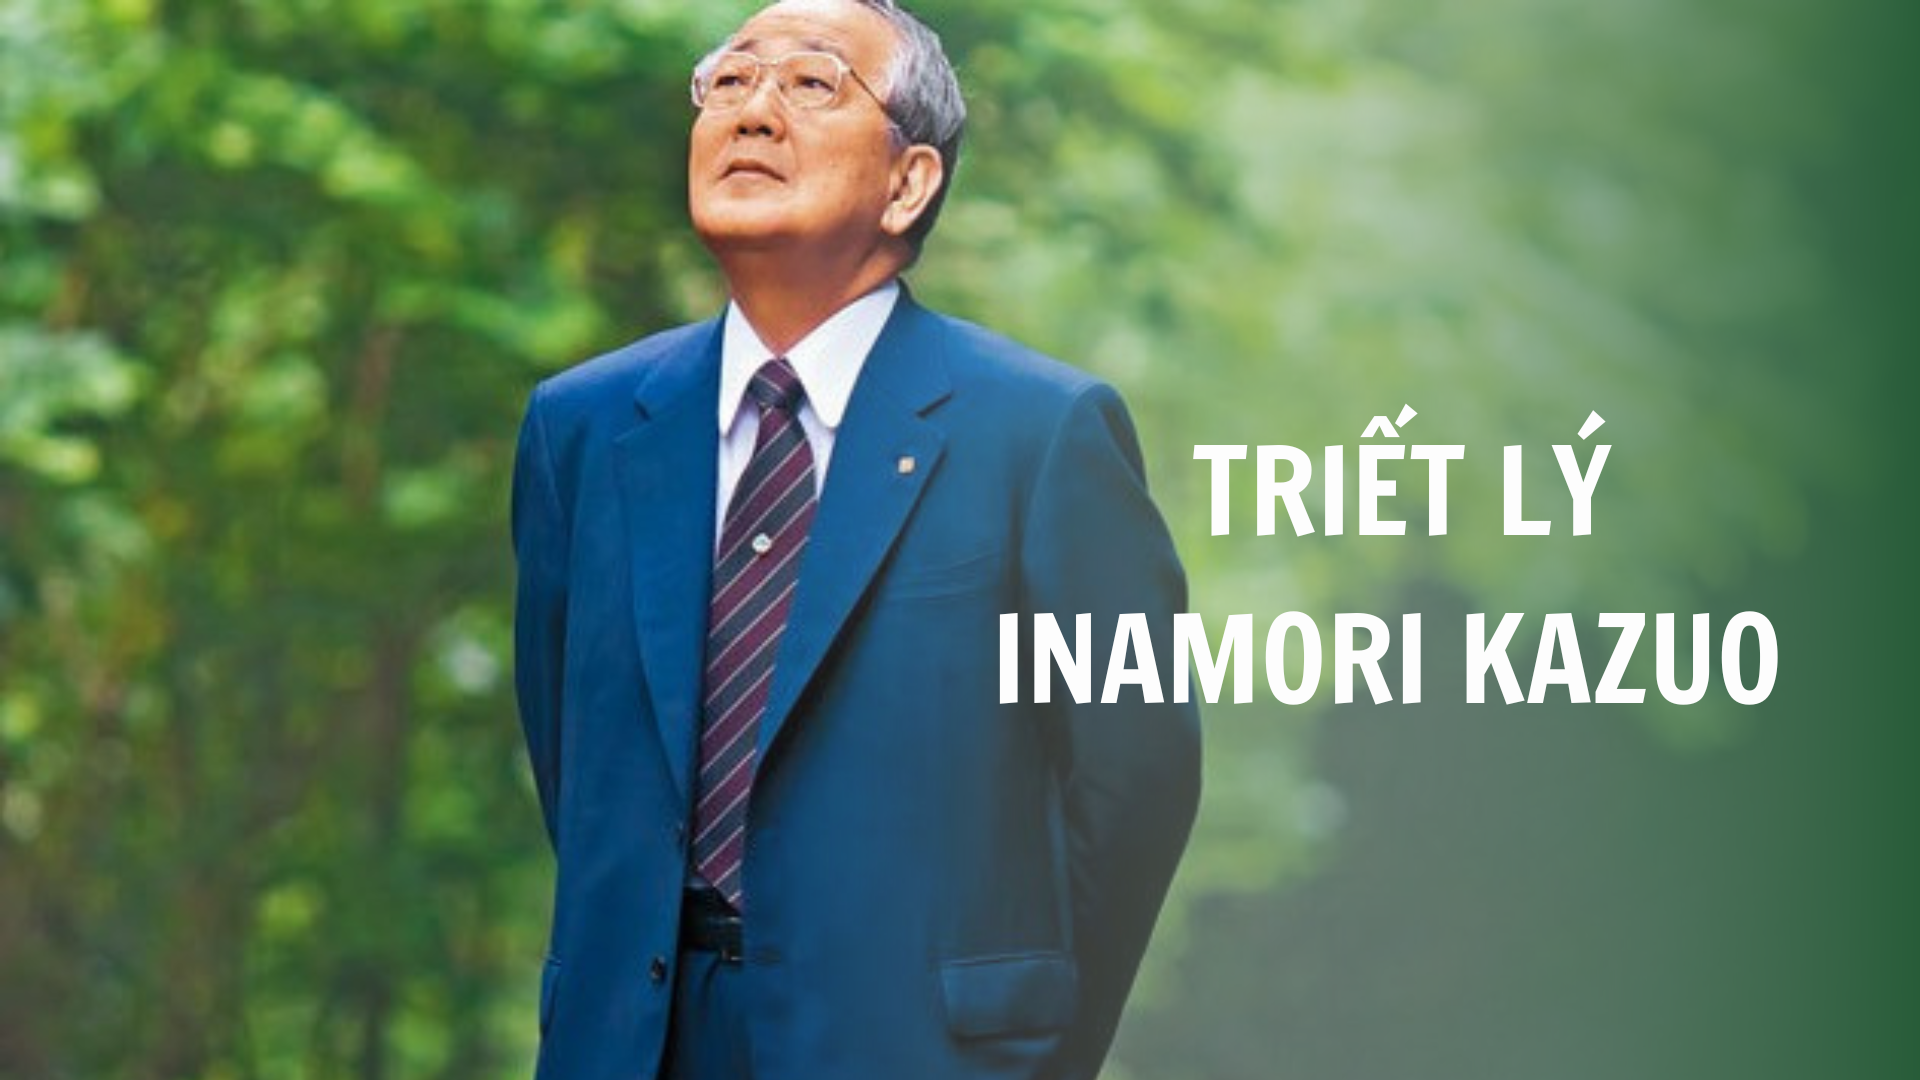 triet-ly-inamori-kazuo-1662441173.png